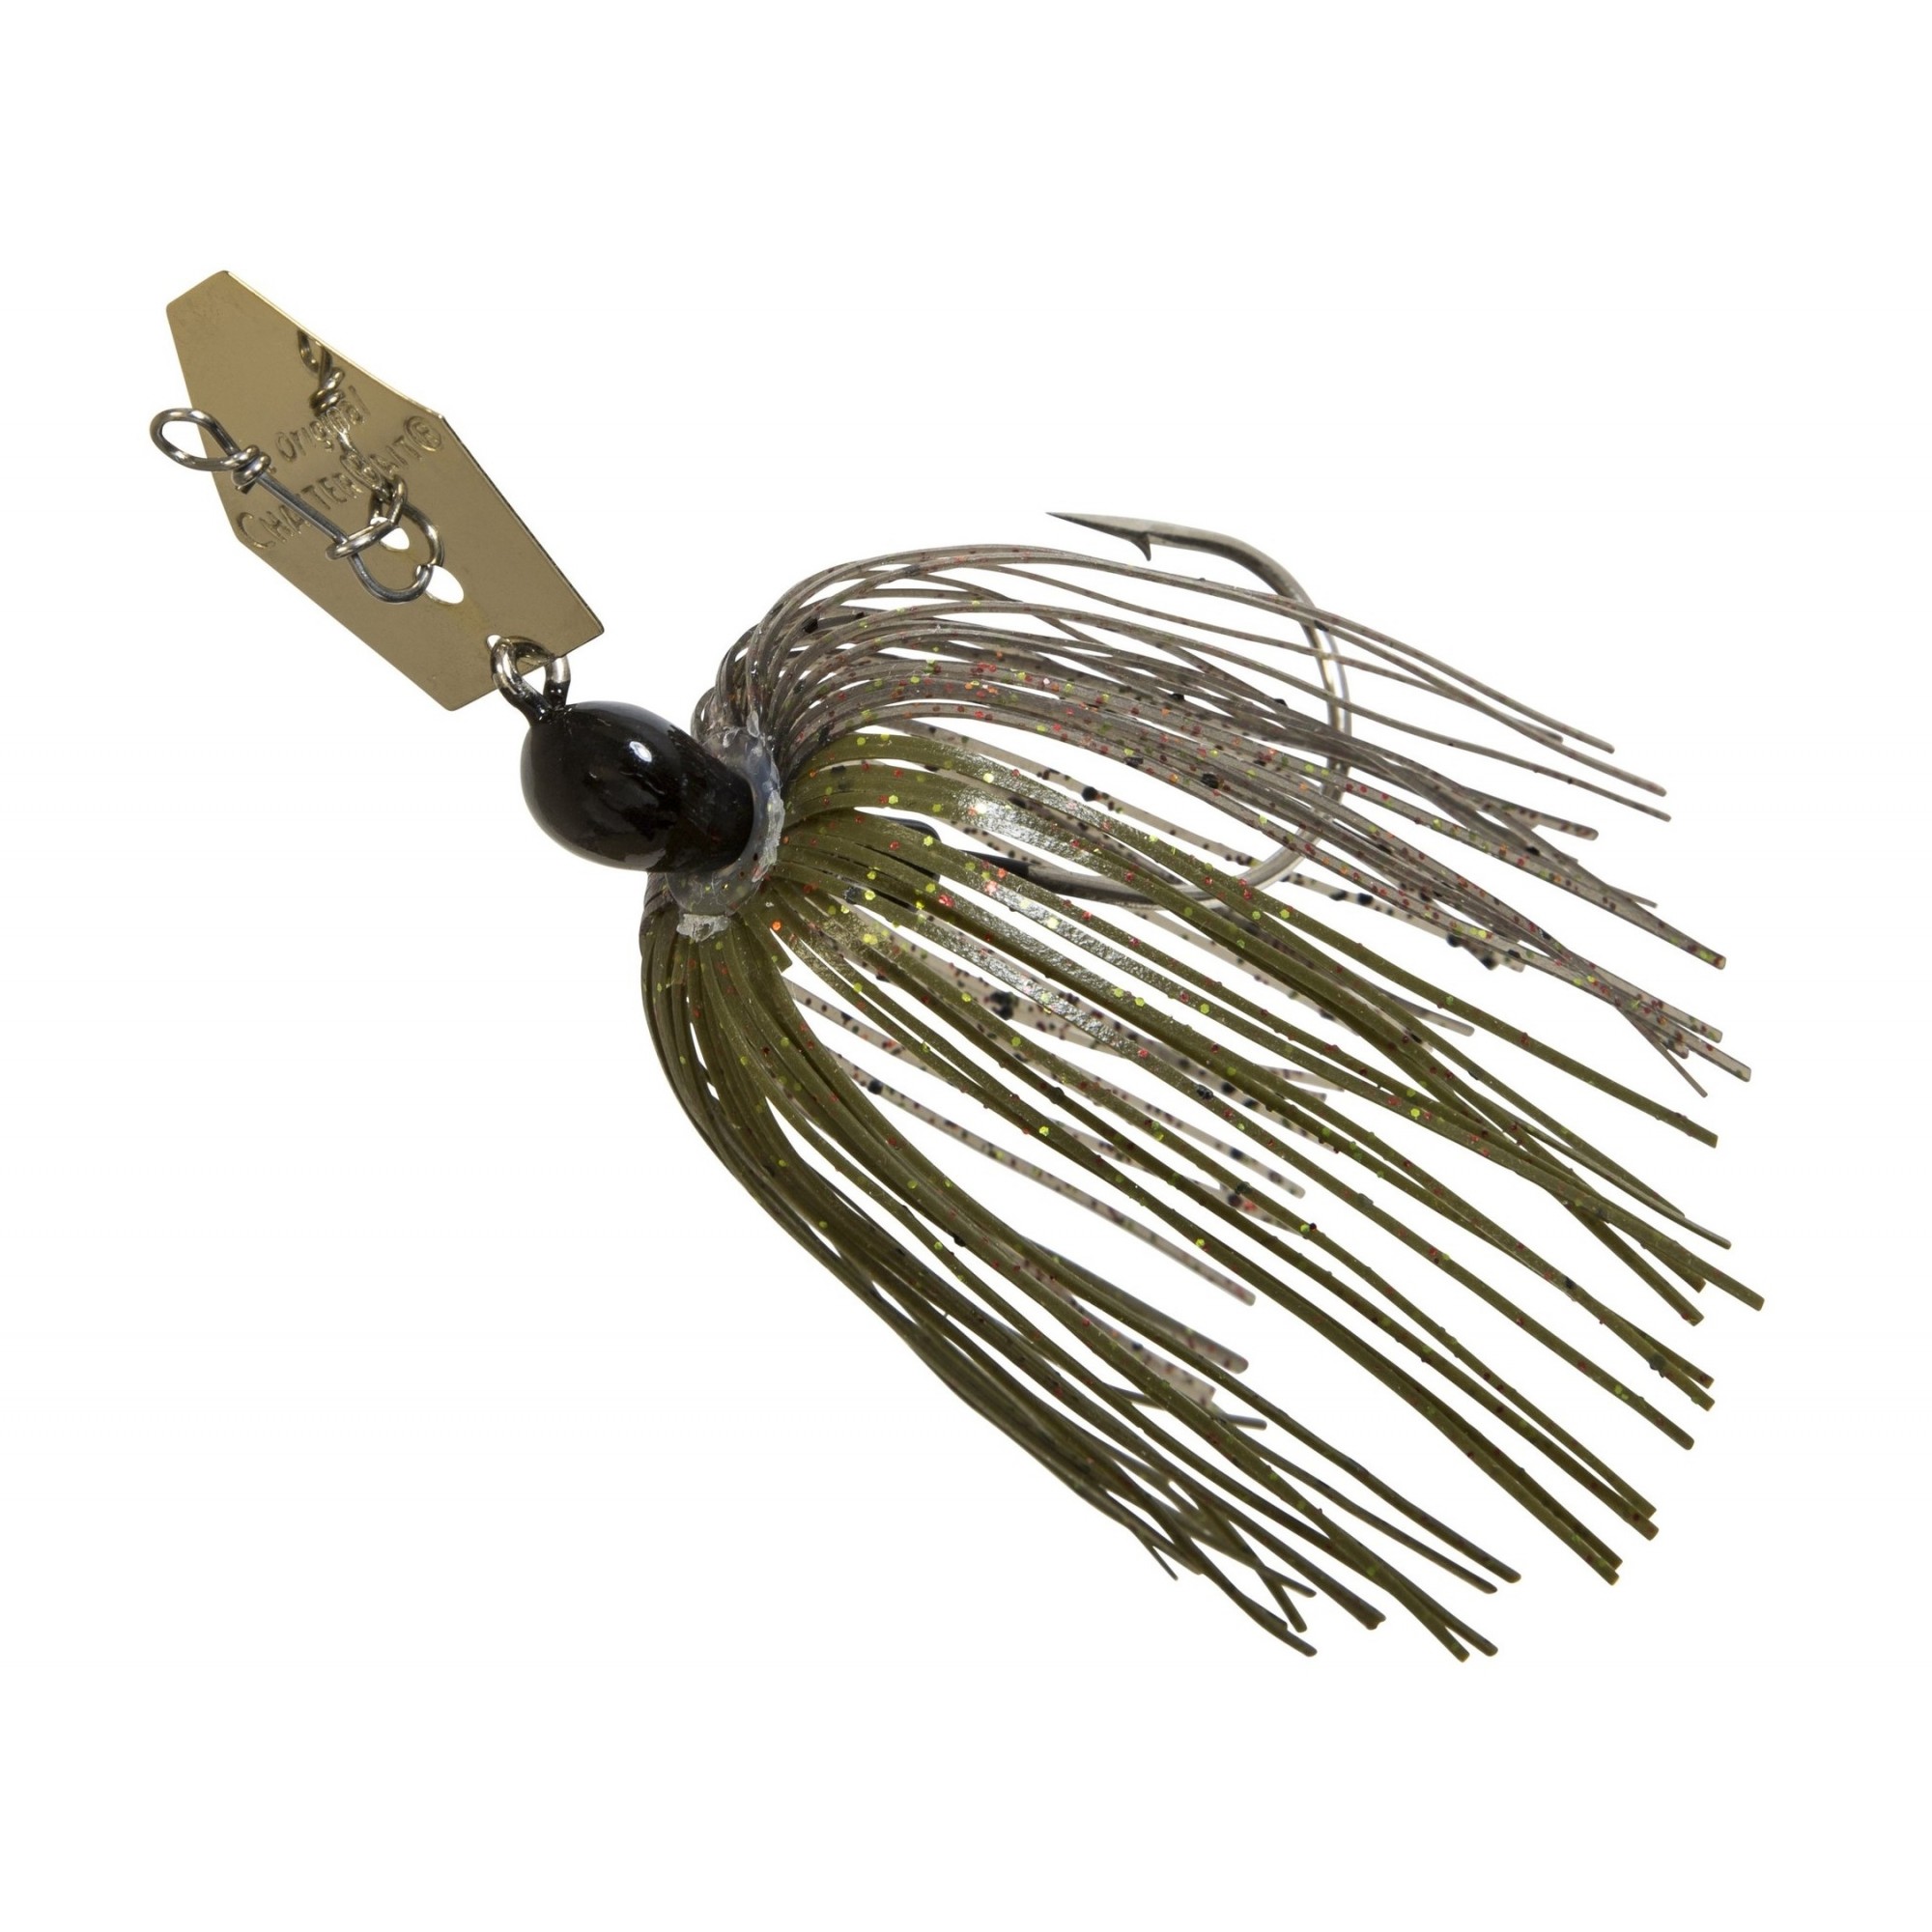 Esche-metalliche-chatterbait-chatter-bladed-jig-z-man-the-original-chatterbait-75-houdini-lure-fishing-planet.